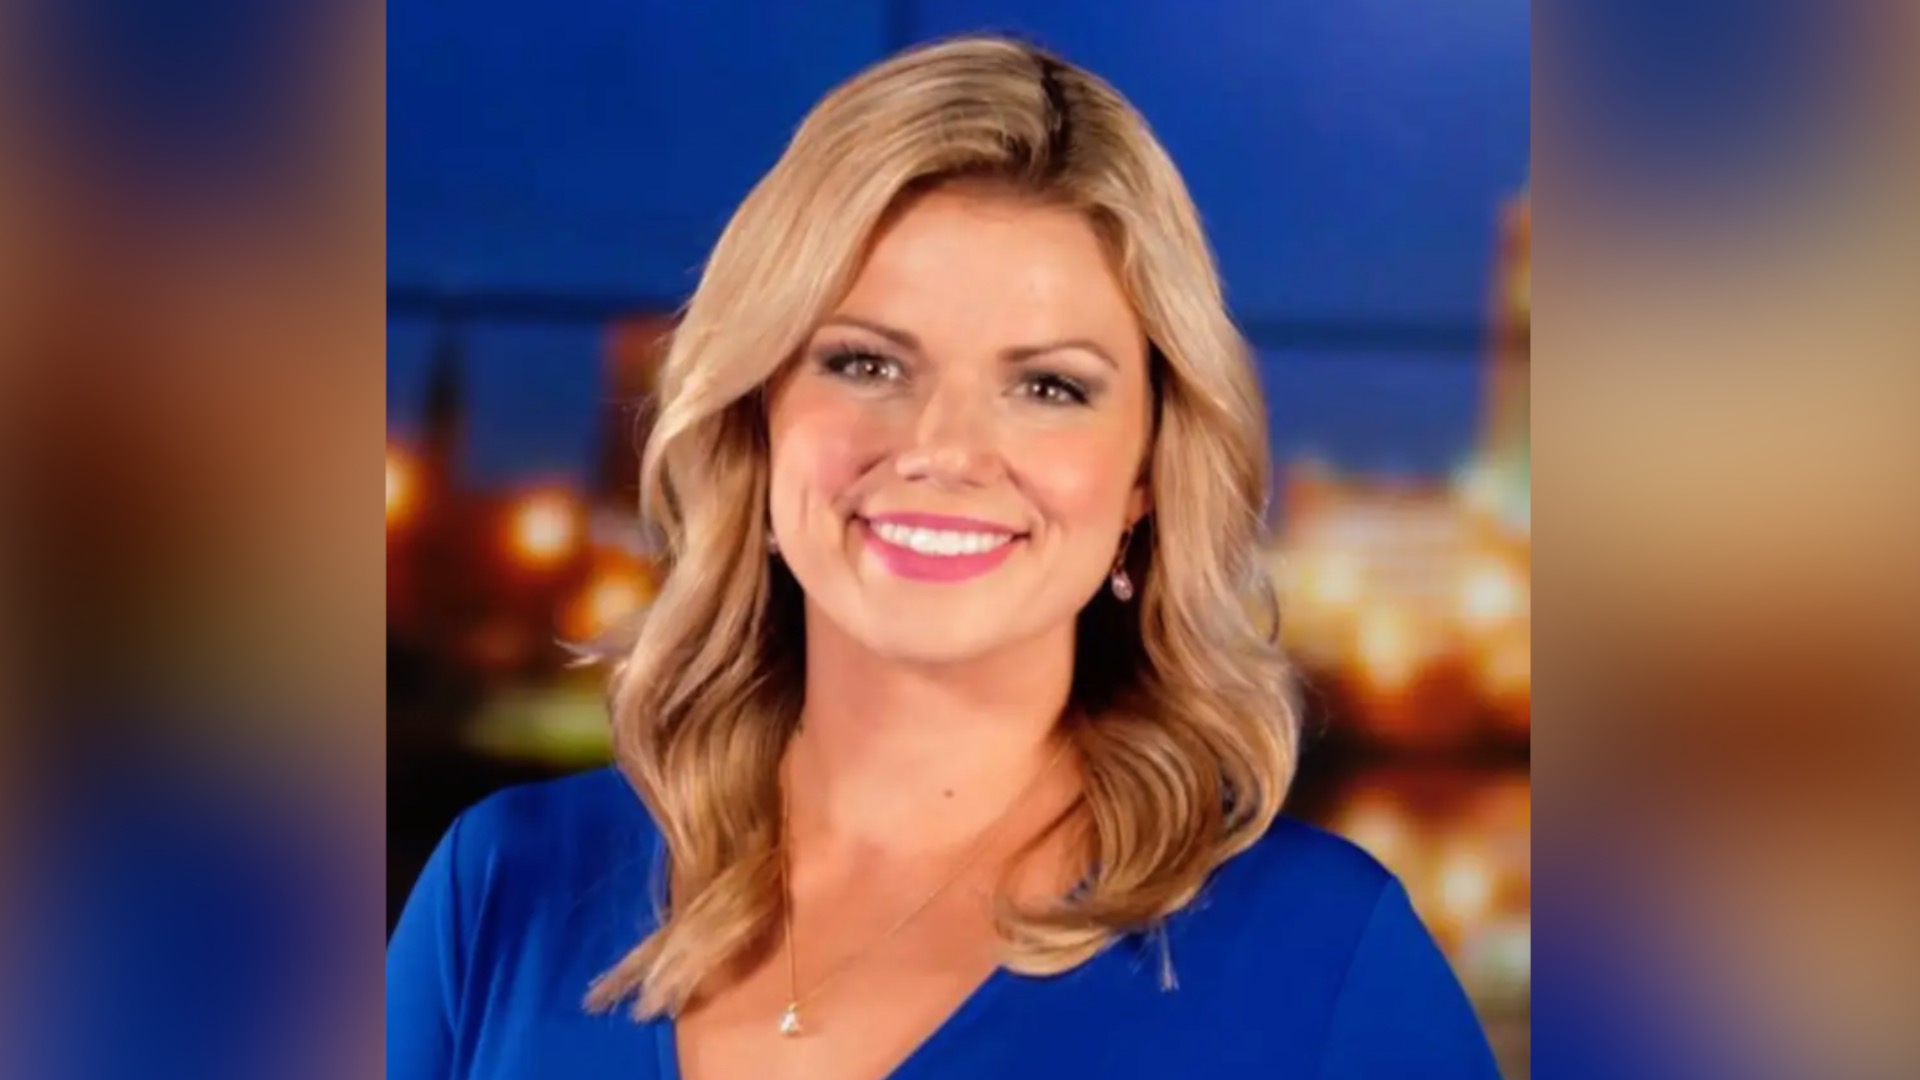 Beloved Wisconsin News Anchor Found Dead at 27 in Apparent Suicide